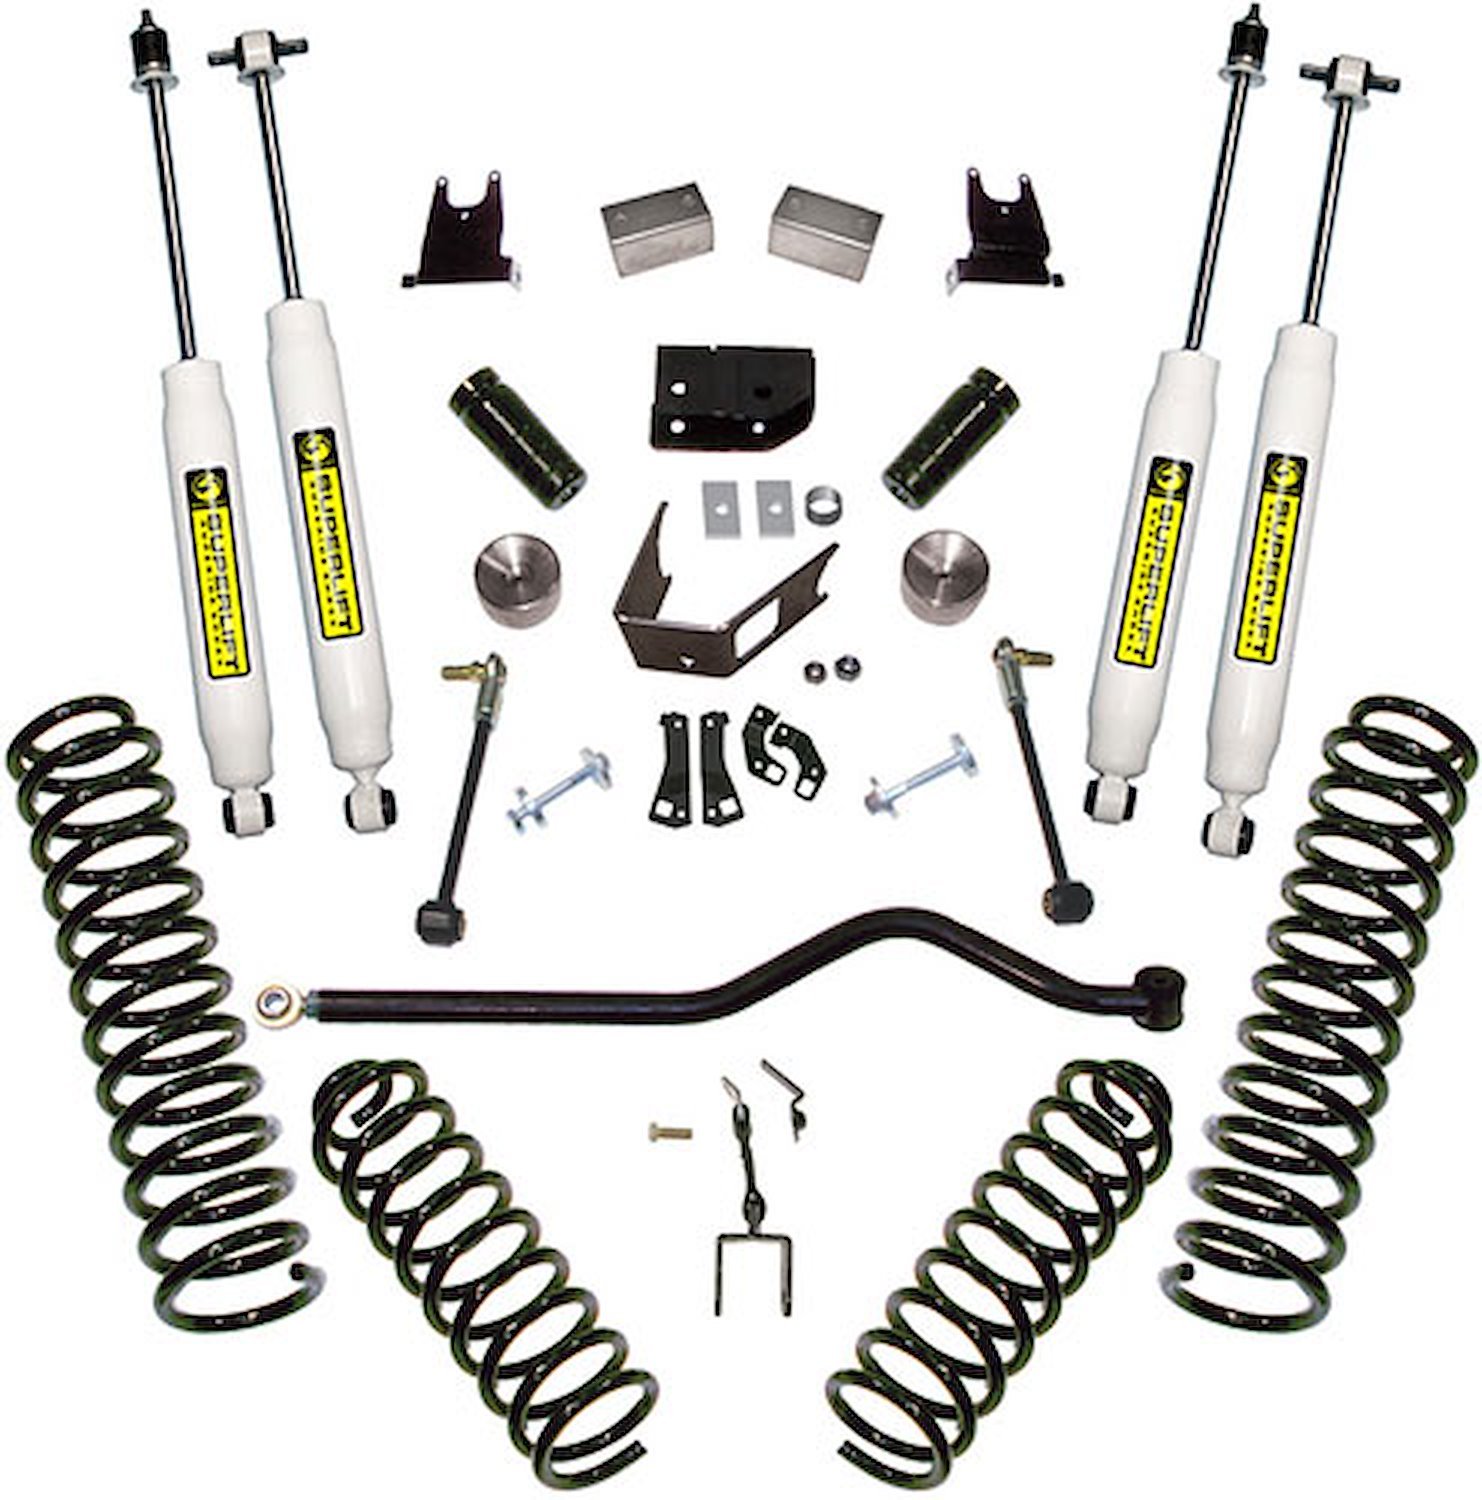 K927 Front and Rear Suspension Lift Kit, Lift Amount: 4 in. Front/4 in. Rear